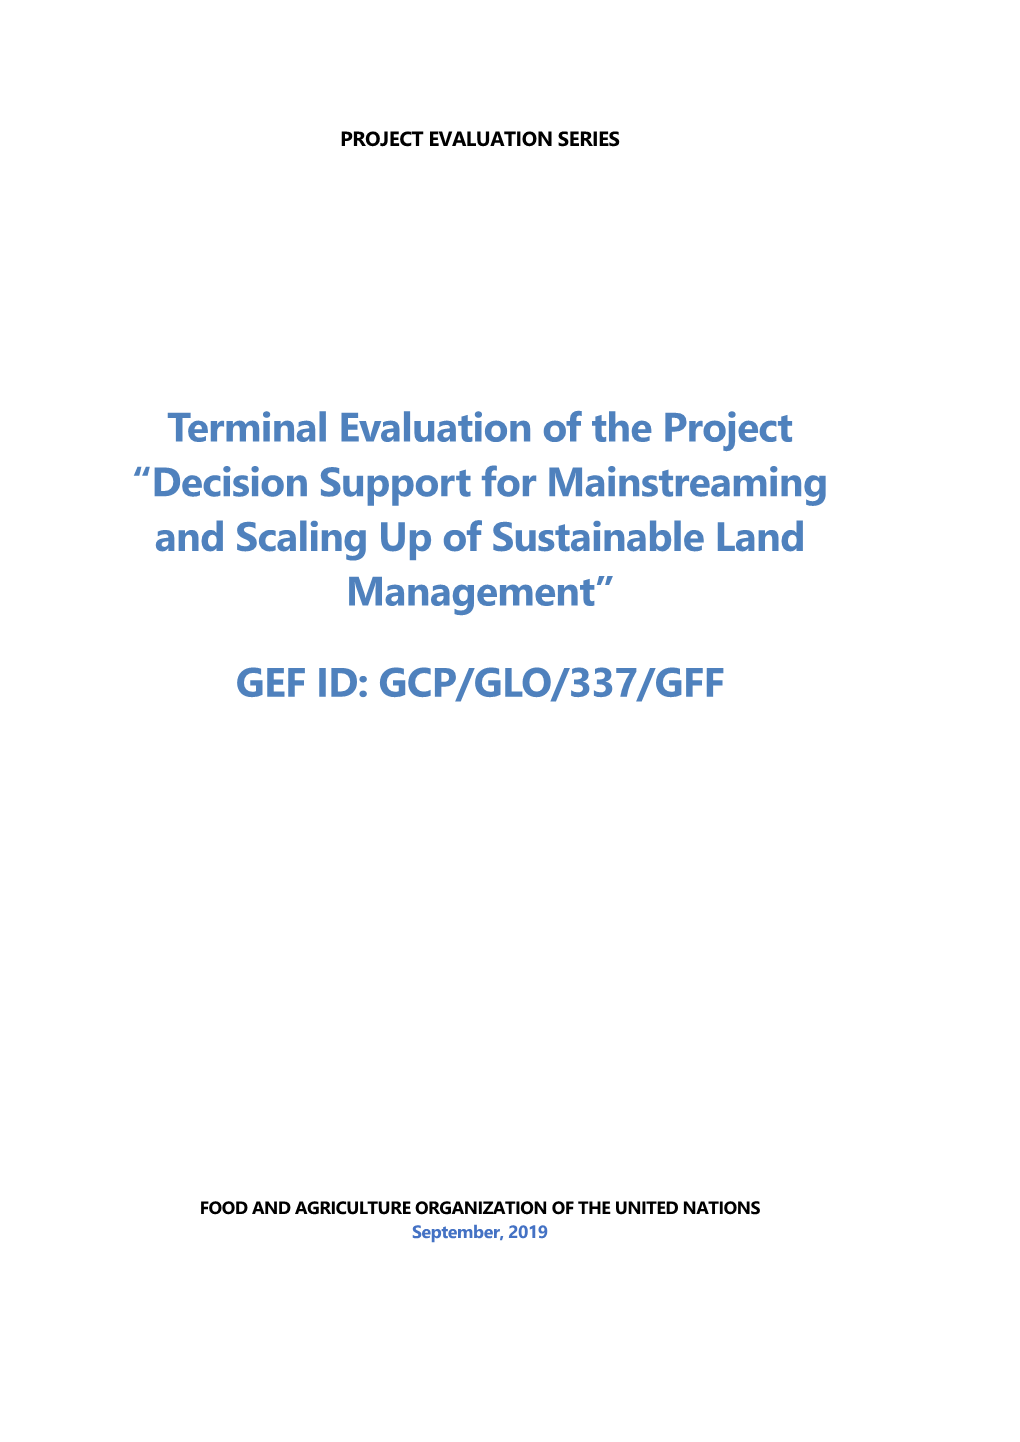 Terminal Evaluation of the Project “Decision Support for Mainstreaming and Scaling up of Sustainable Land Management”